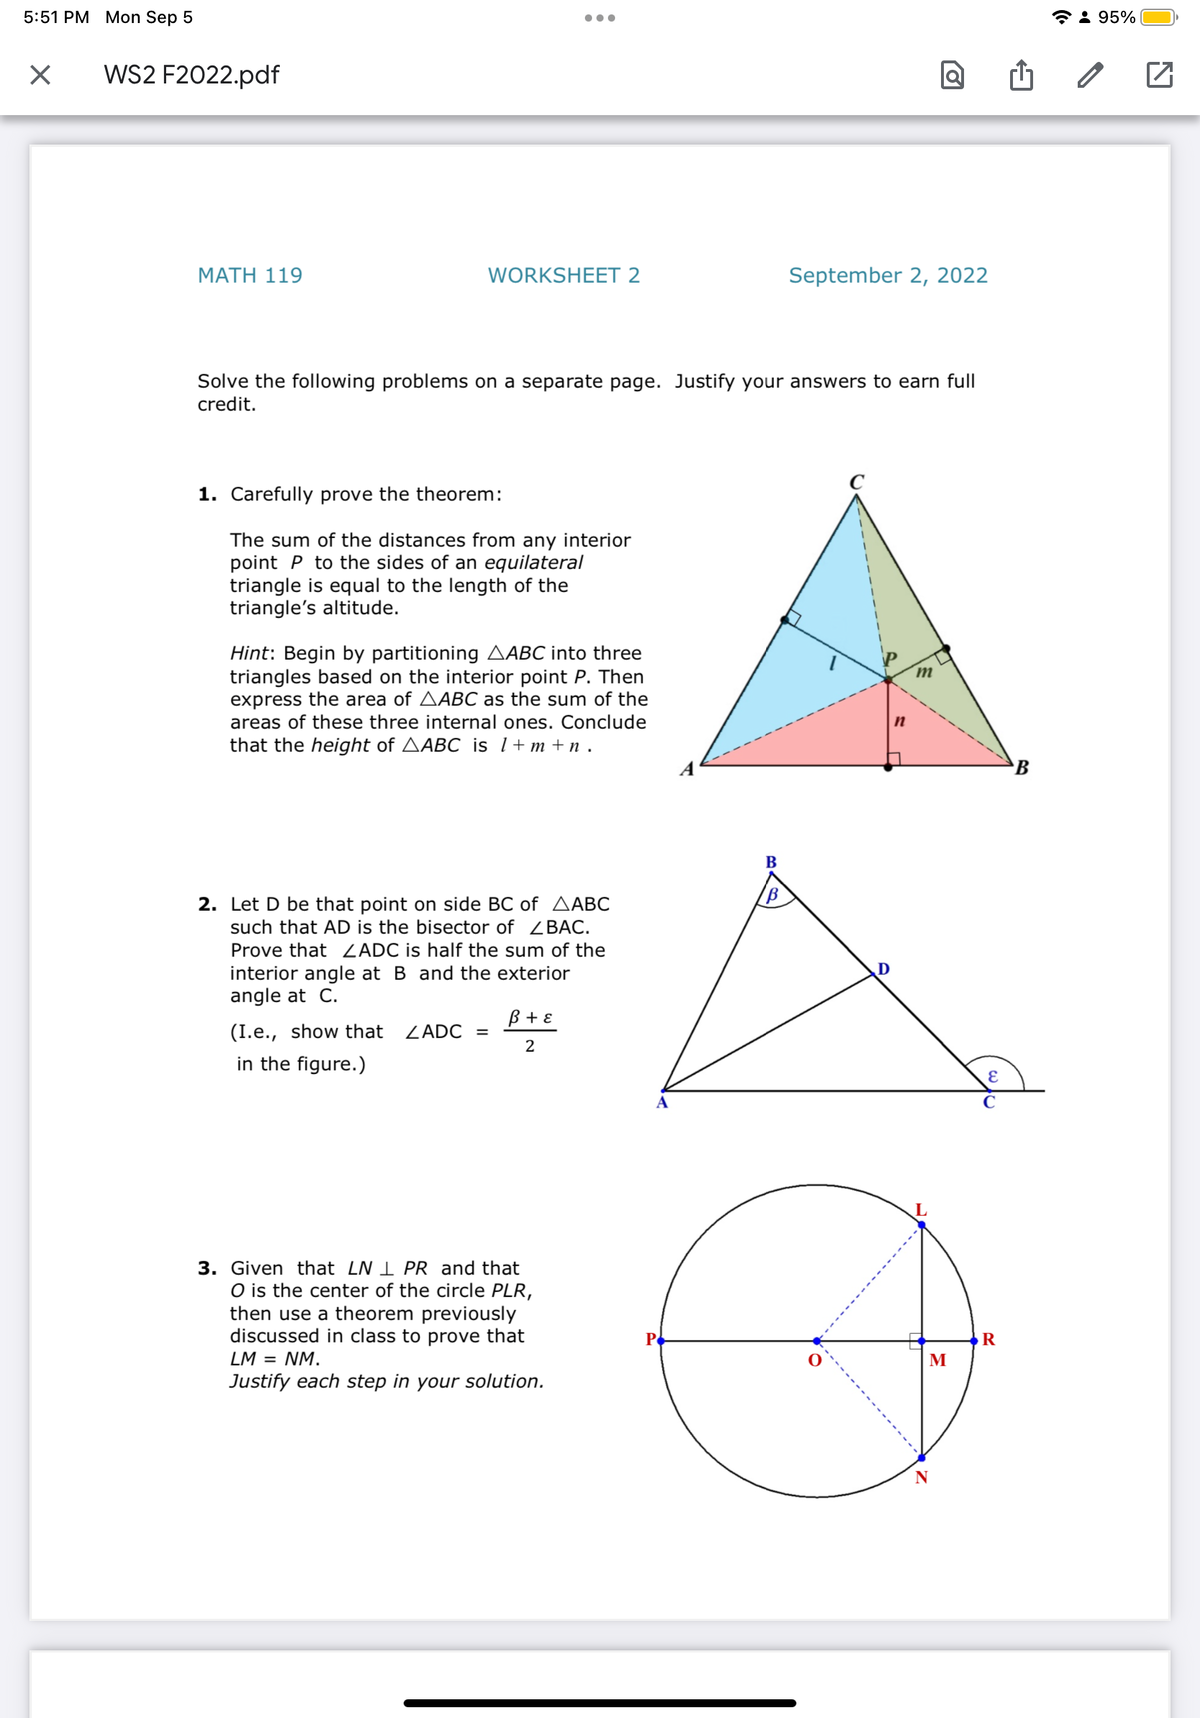 5:51 PM Mon Sep 5
X
WS2 F2022.pdf
MATH 119
WORKSHEET 2
1. Carefully prove the theorem:
The sum of the distances from any interior
point P to the sides of an equilateral
triangle is equal to the length of the
triangle's altitude.
●●●
Solve the following problems on a separate page. Justify your answers to earn full
credit.
Hint: Begin by partitioning AABC into three
triangles based on the interior point P. Then
express the area of AABC as the sum of the
areas of these three internal ones. Conclude
that the height of AABC is 1+m+n.
(I.e., show that
in the figure.)
2. Let D be that point on side BC of AABC
such that AD is the bisector of ZBAC.
Prove that ZADC is half the sum of the
interior angle at B and the exterior
angle at C.
ZADC =
B + ε
2
3. Given that LN 1 PR and that
O is the center of the circle PLR,
then use a theorem previously
discussed in class to prove that
LM = NM.
Justify each step in your solution.
P
B
B
September 2, 2022
a
D
M
N
E
C
R
B
95%